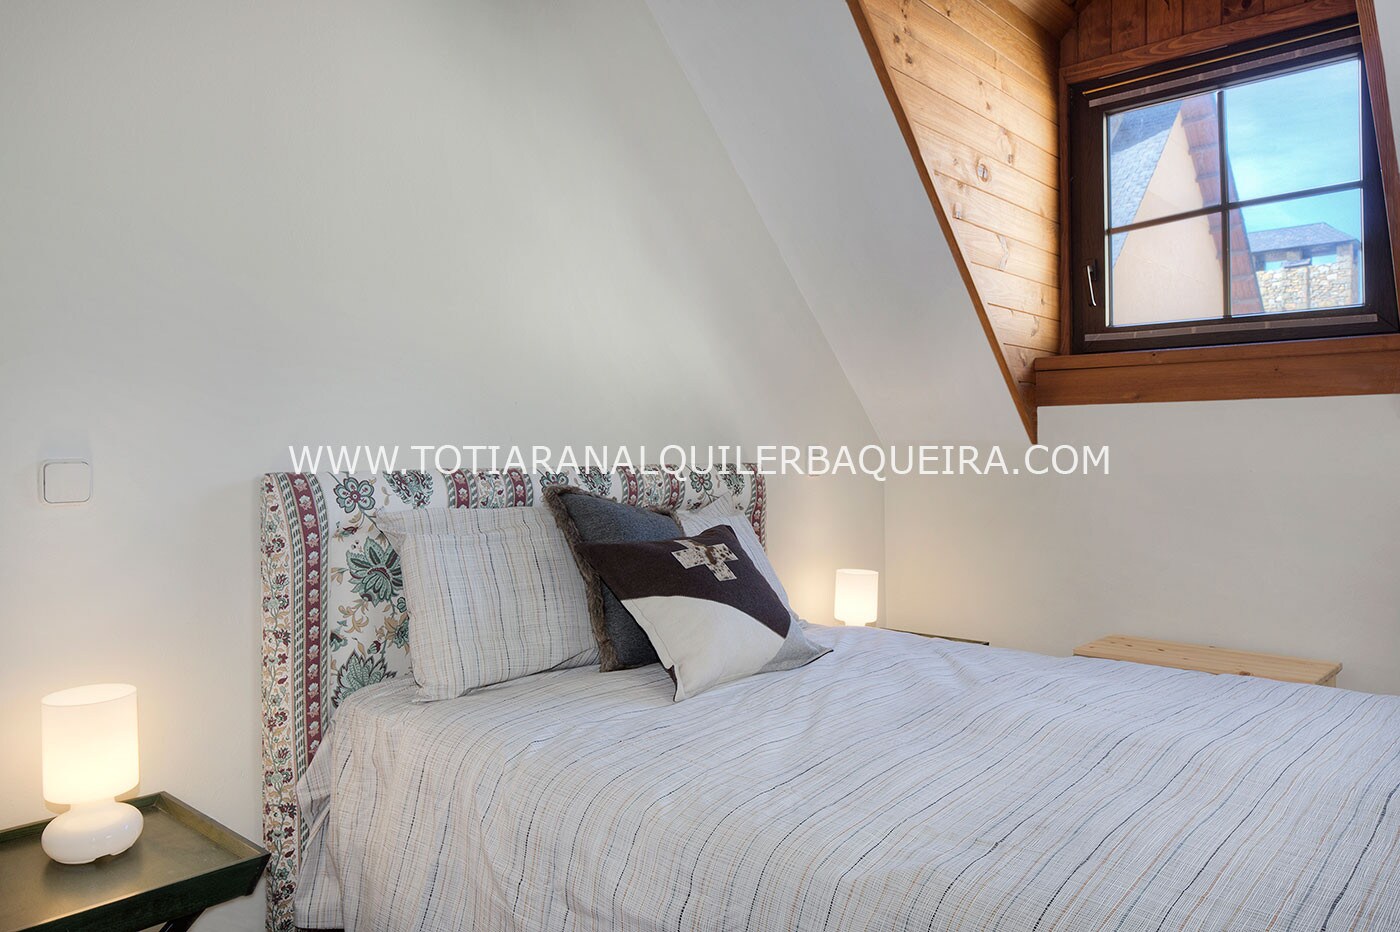 Toran Apartment 2 bedrooms 6 people, in Tanau at Baqueira next to the chairlift of Esquiros slopes